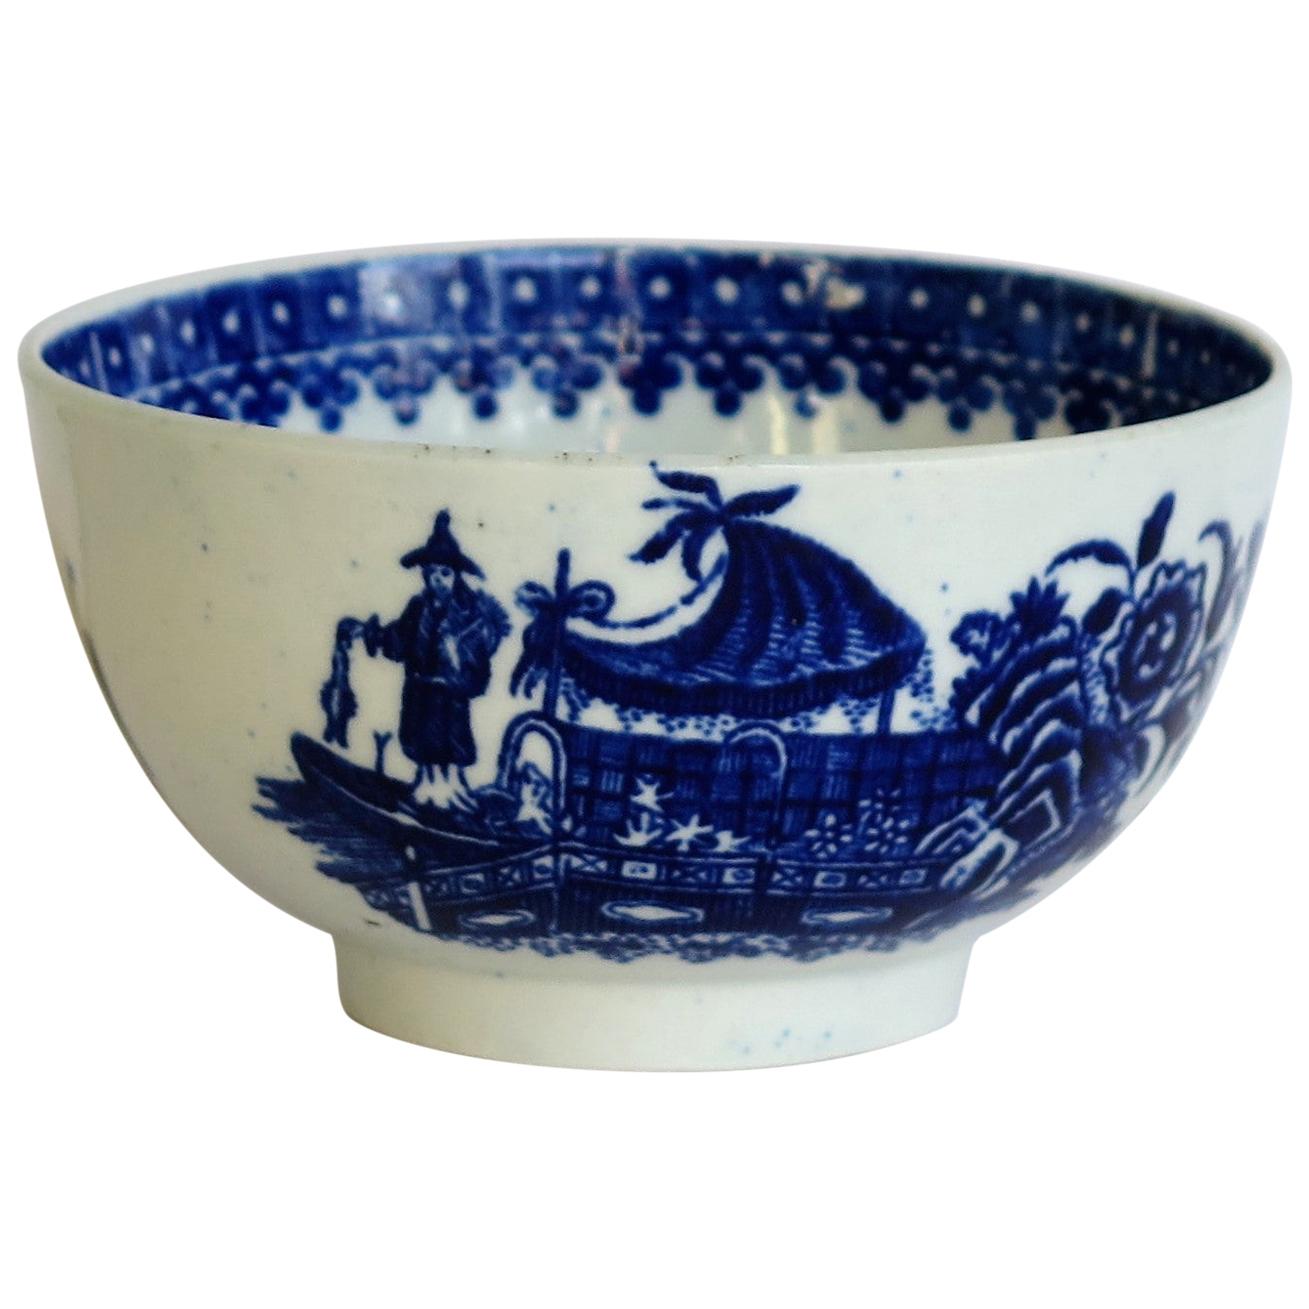 First Period Dr. Wall Worcester porcelain Blue Bowl in Fisherman Ptn, Circa 1775